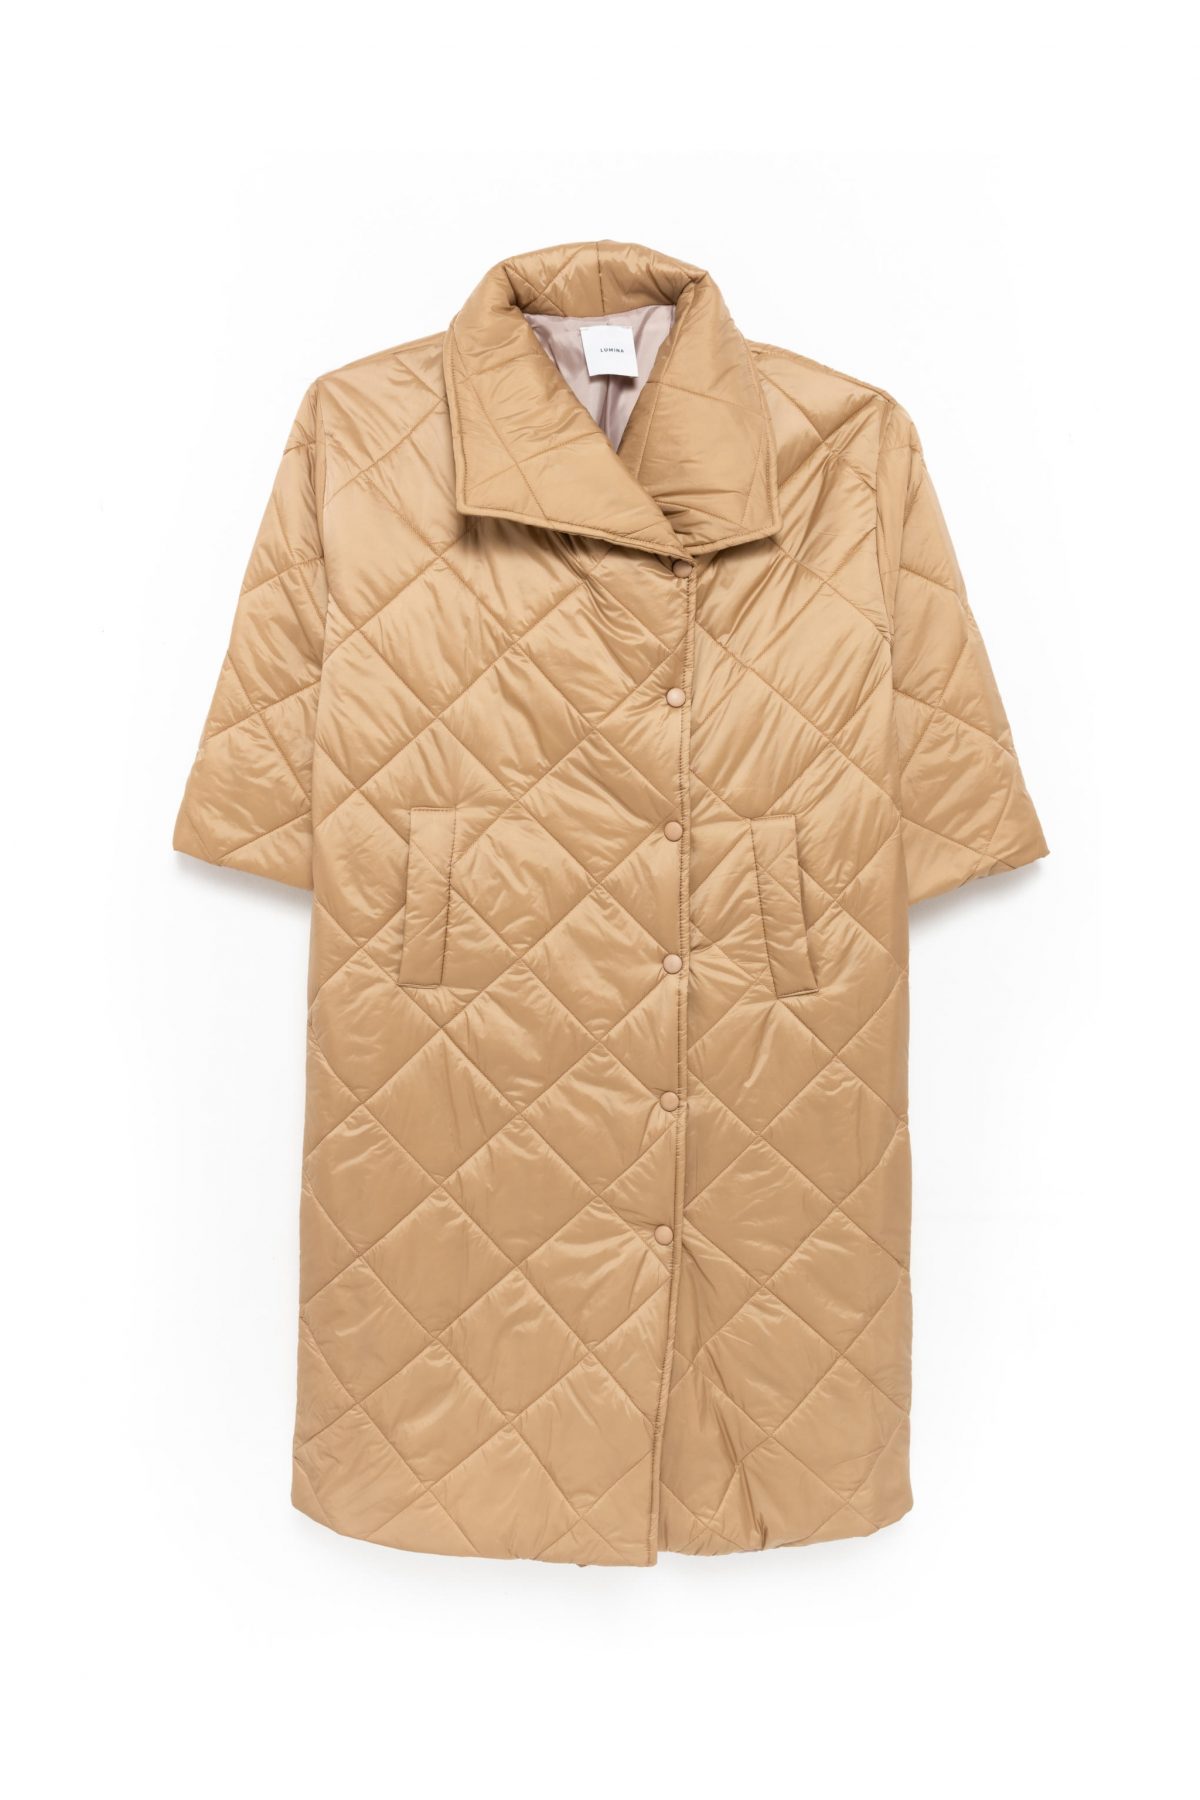 Quilted jacket in beige color